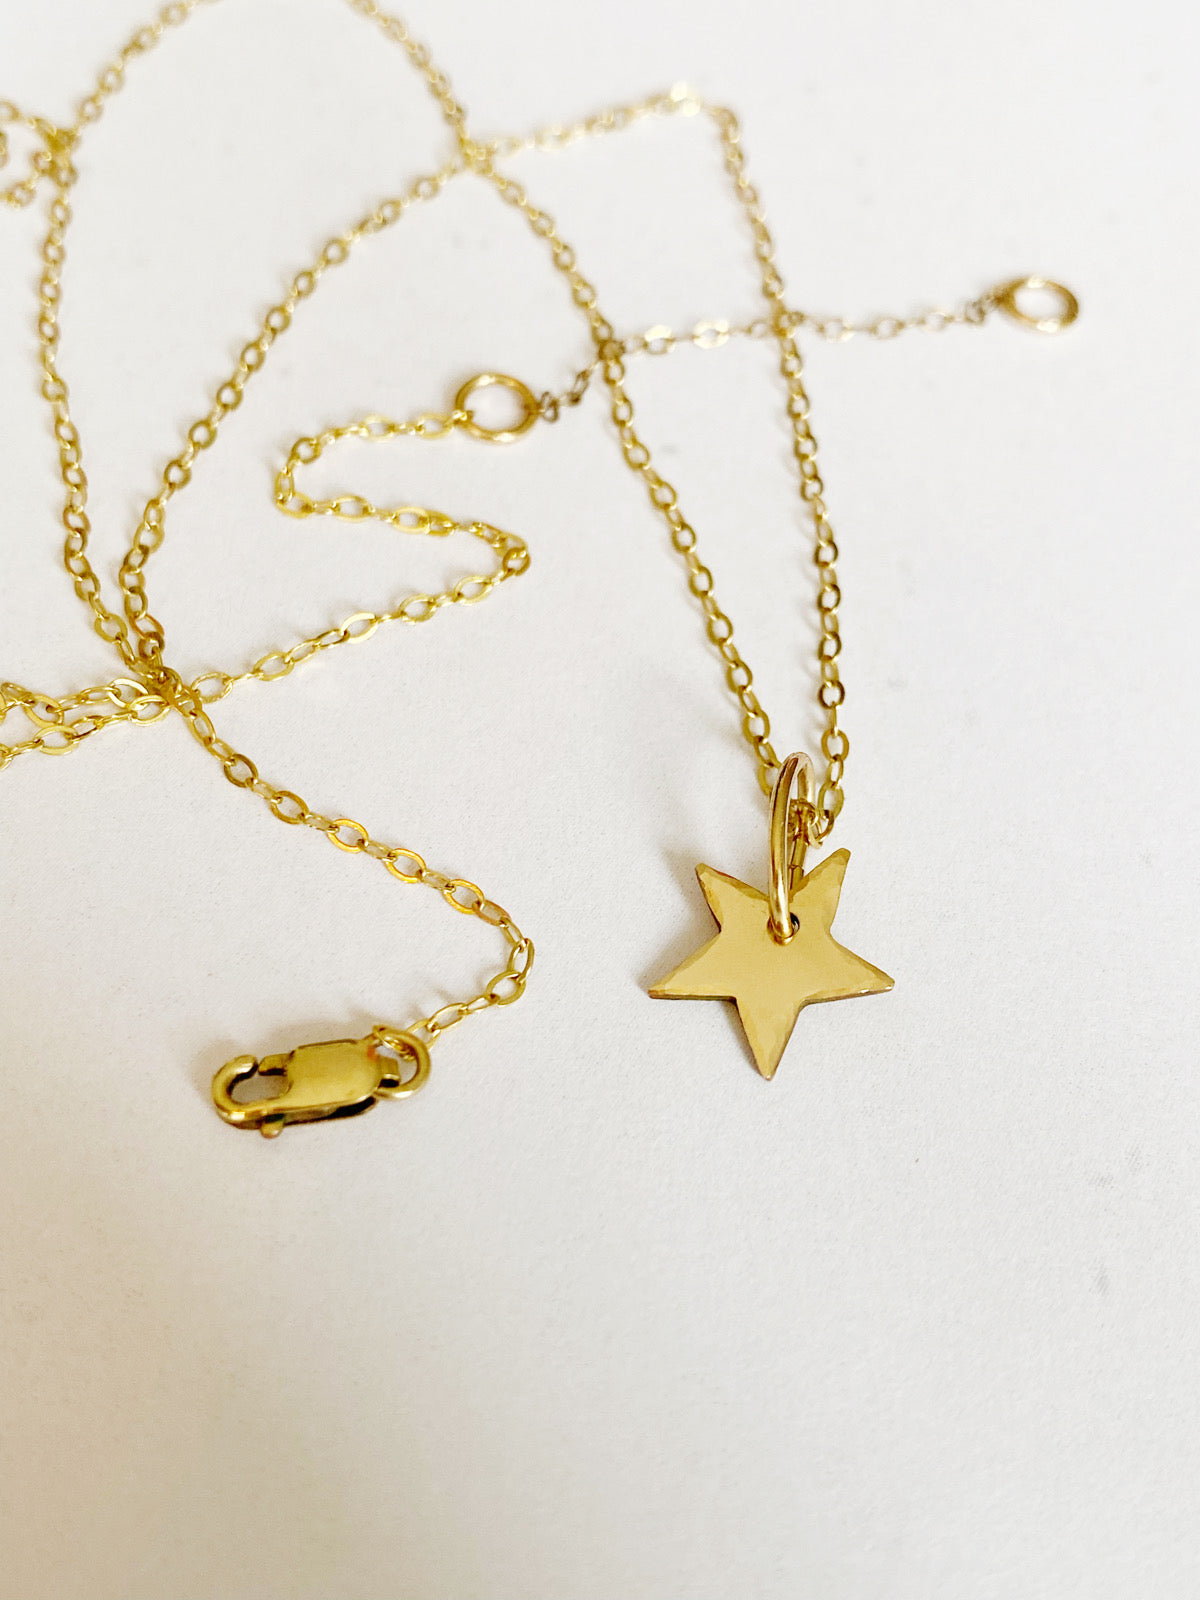  gold star necklace - andJules Jewelry